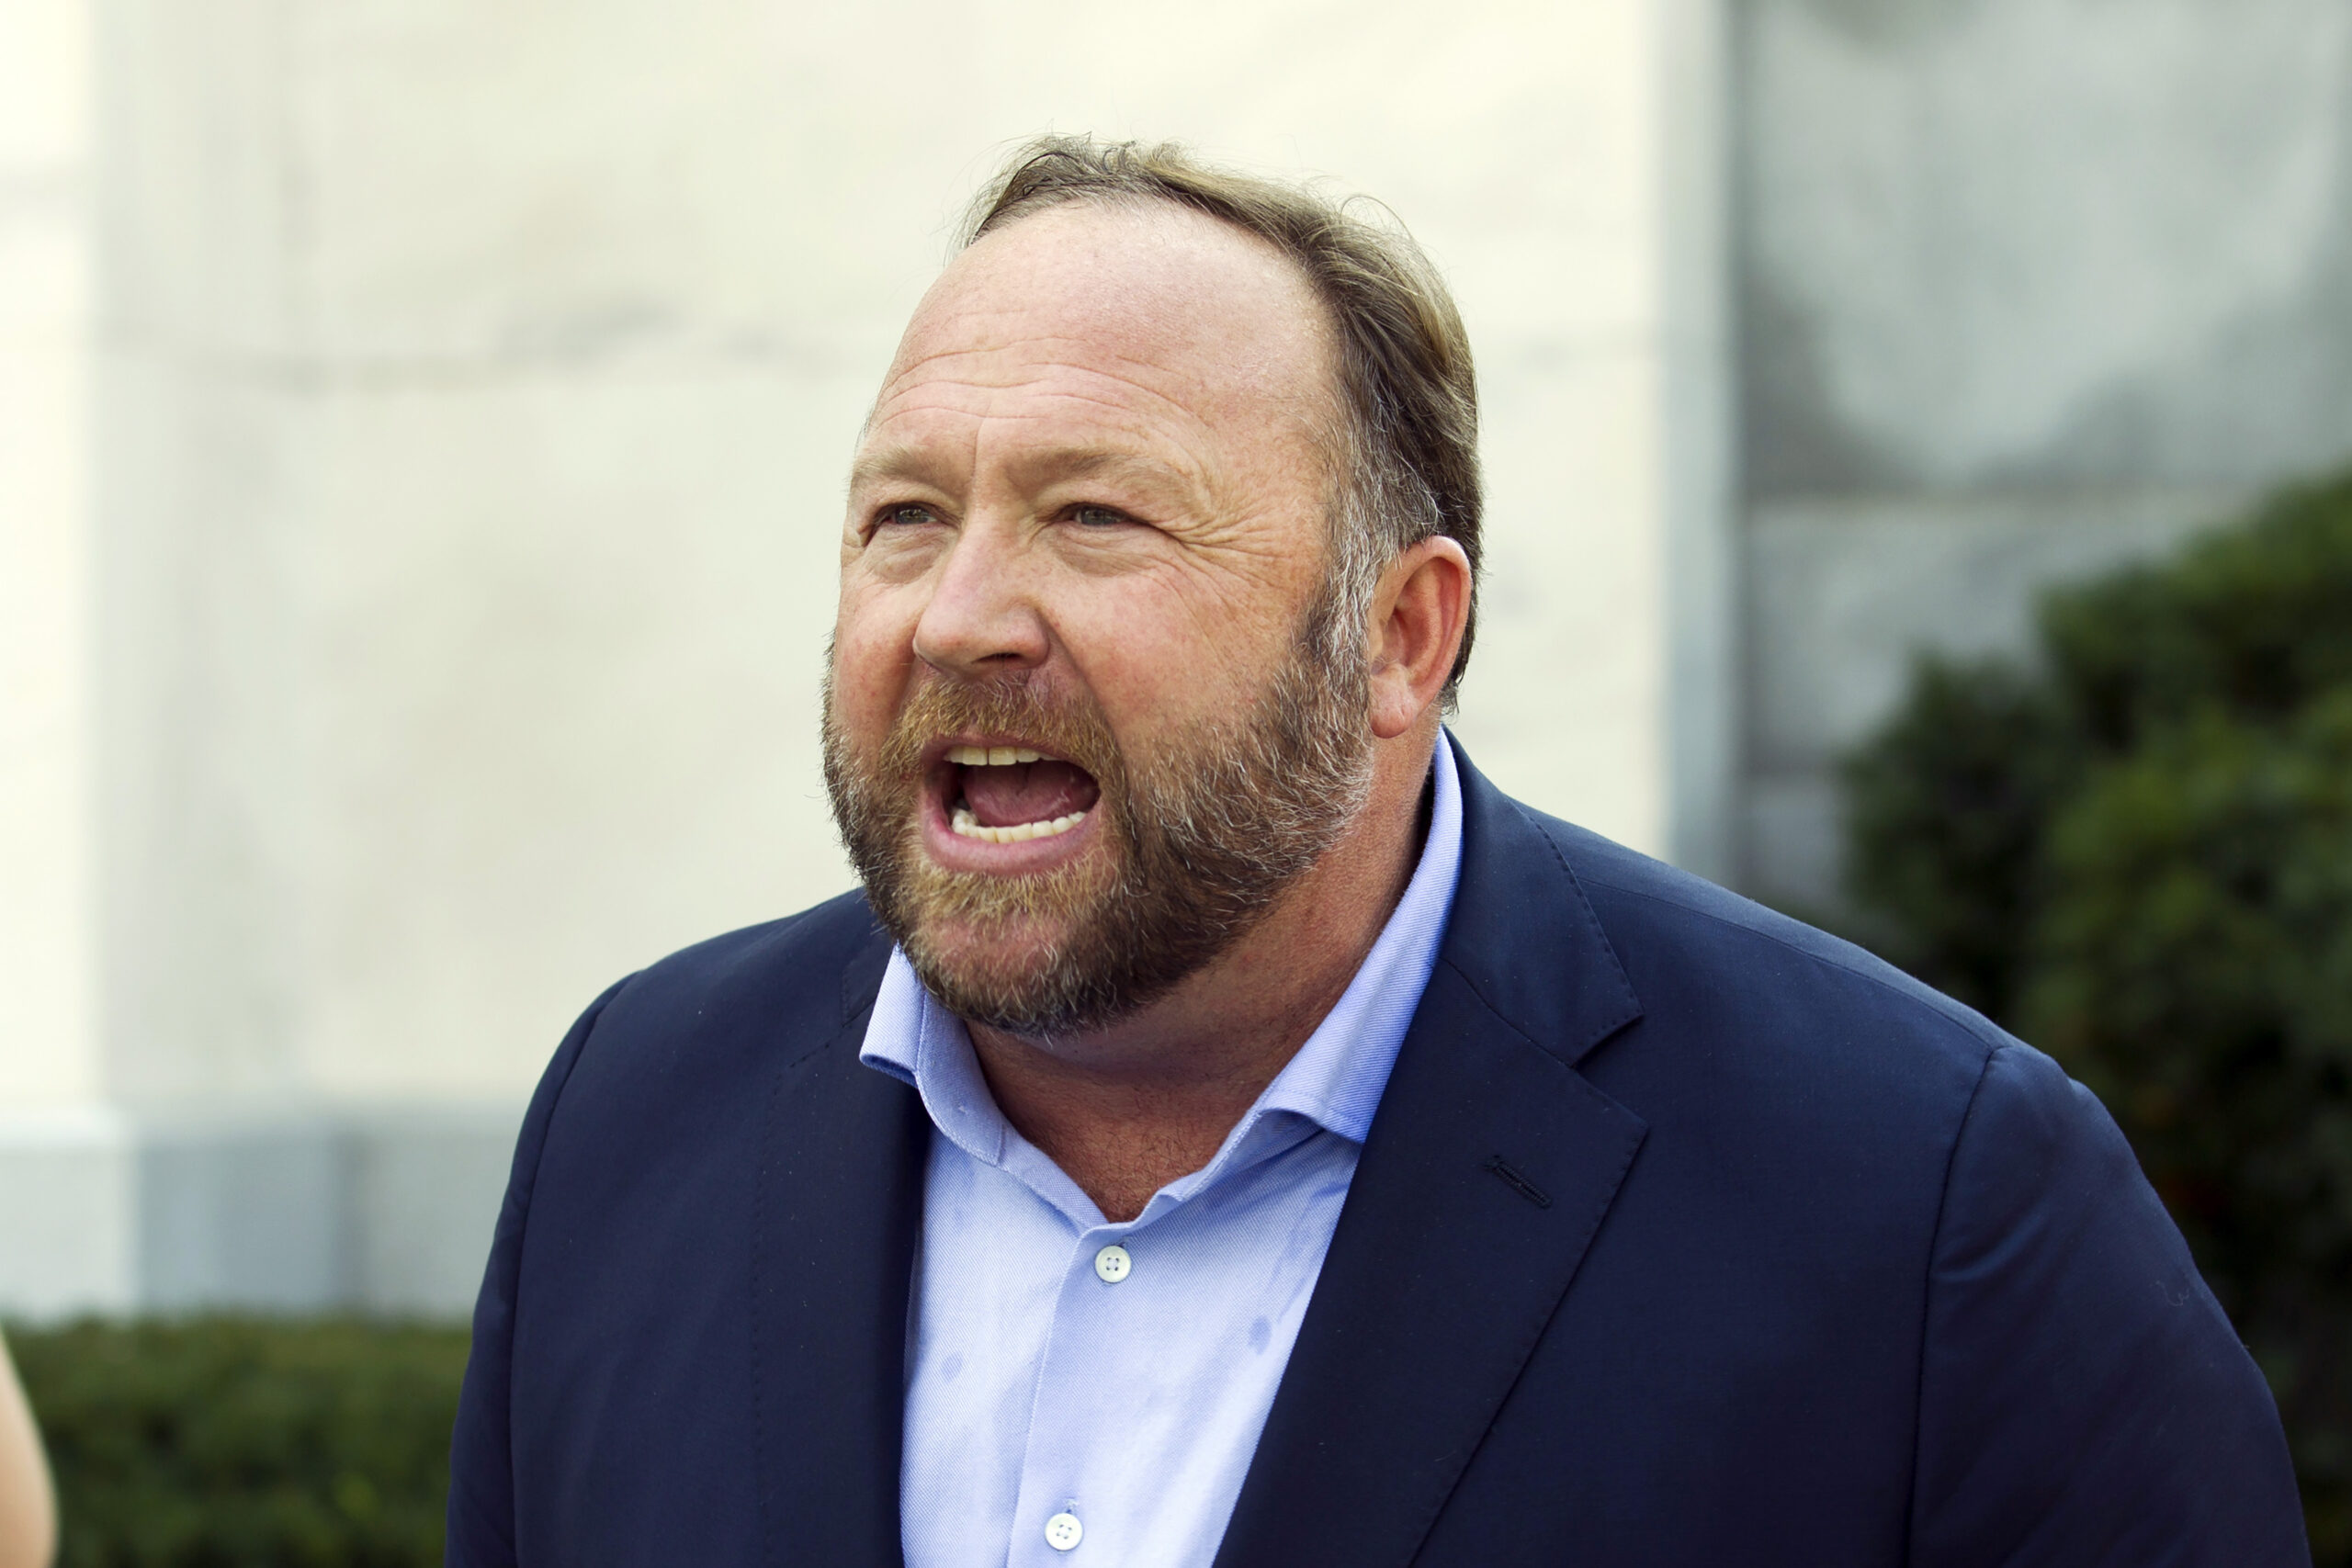 FILE - Infowars host and conspiracy theorist Alex Jones speaks outside of the Dirksen building on Capitol Hill in Washington, Sept. 5, 2018. Jury selection is set for Monday, July 25, 2022, in a trial that will determine for the first time how much Jones must pay Sandy Hook Elementary School parents for falsely telling his audience that the deadliest classroom shooting in U.S. history was a hoax. (AP Photo/Jose Luis Magana, File)